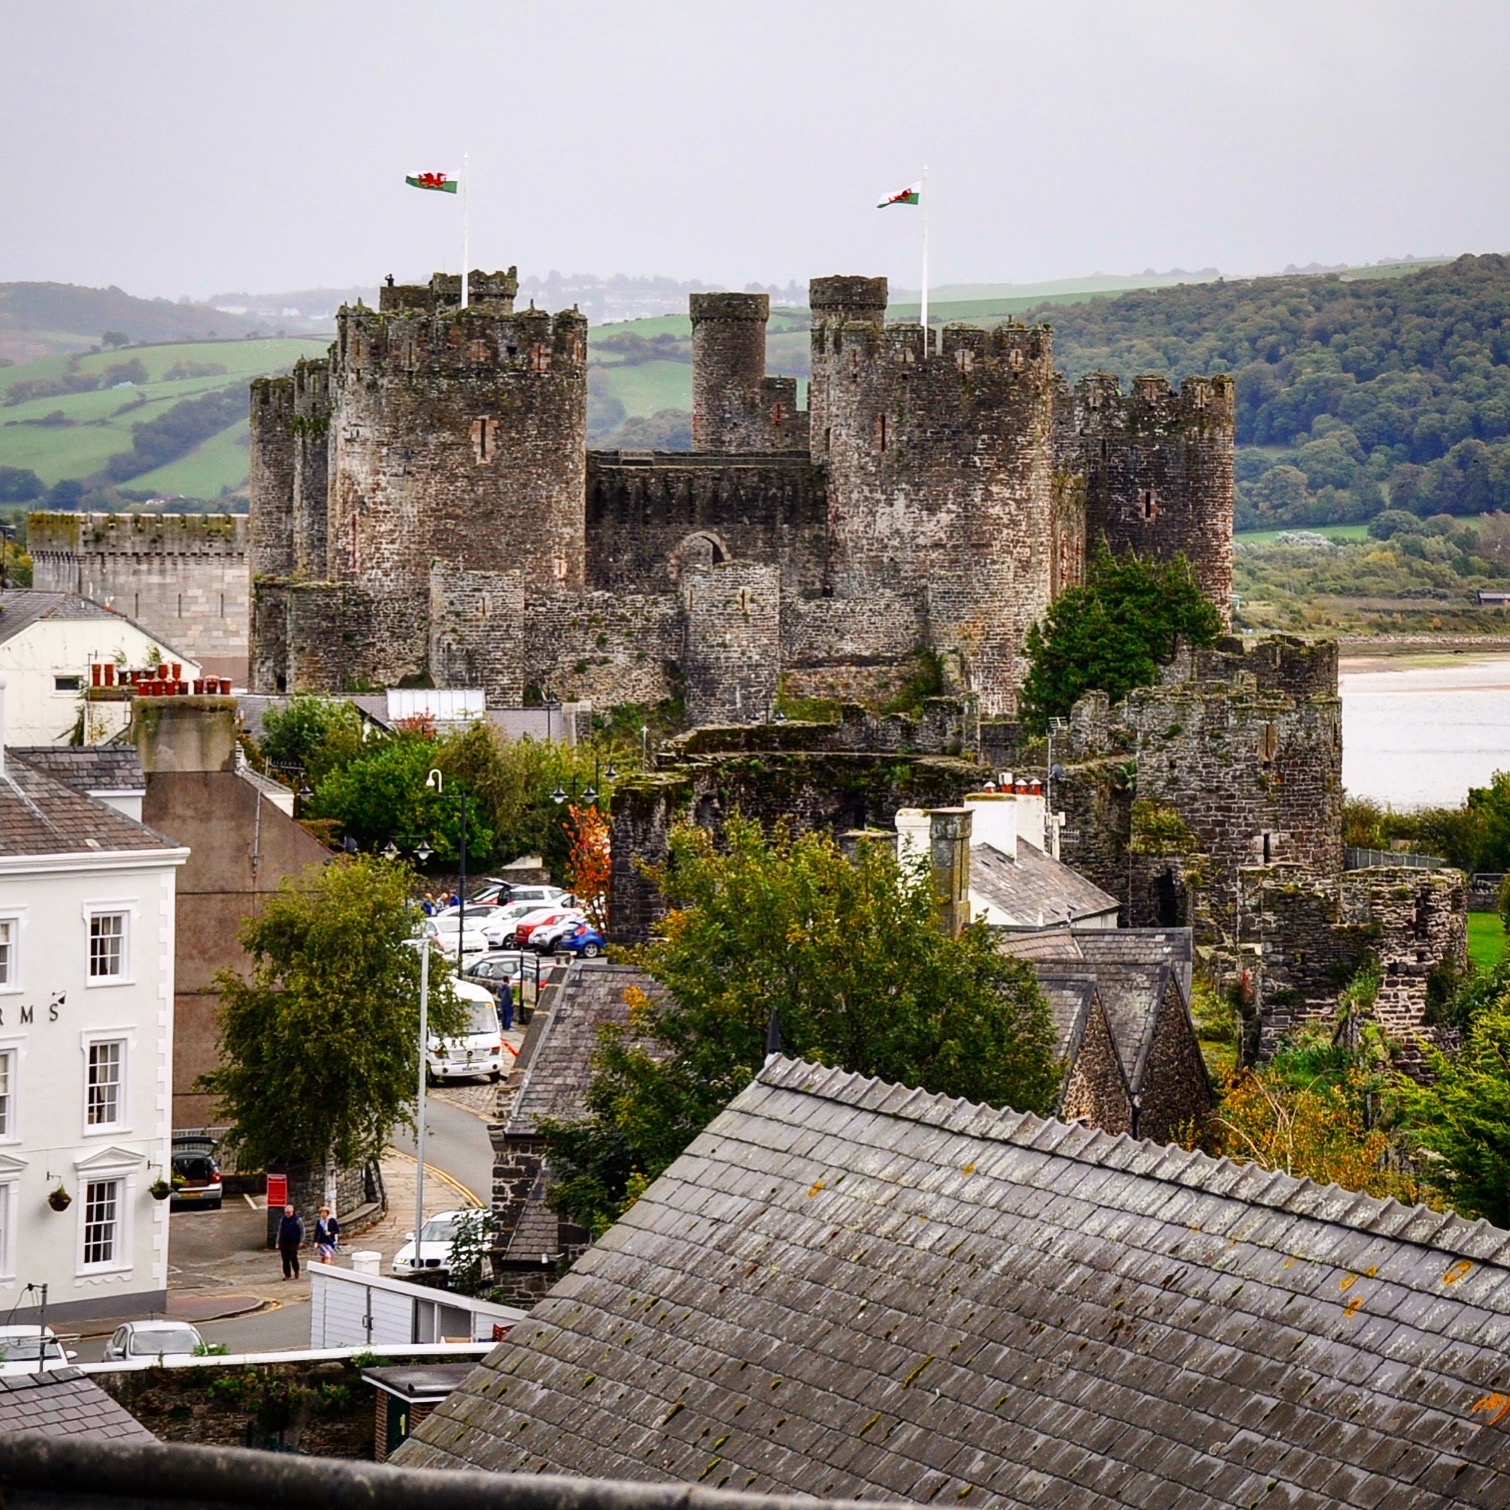 View of Conwy Castle from the walls